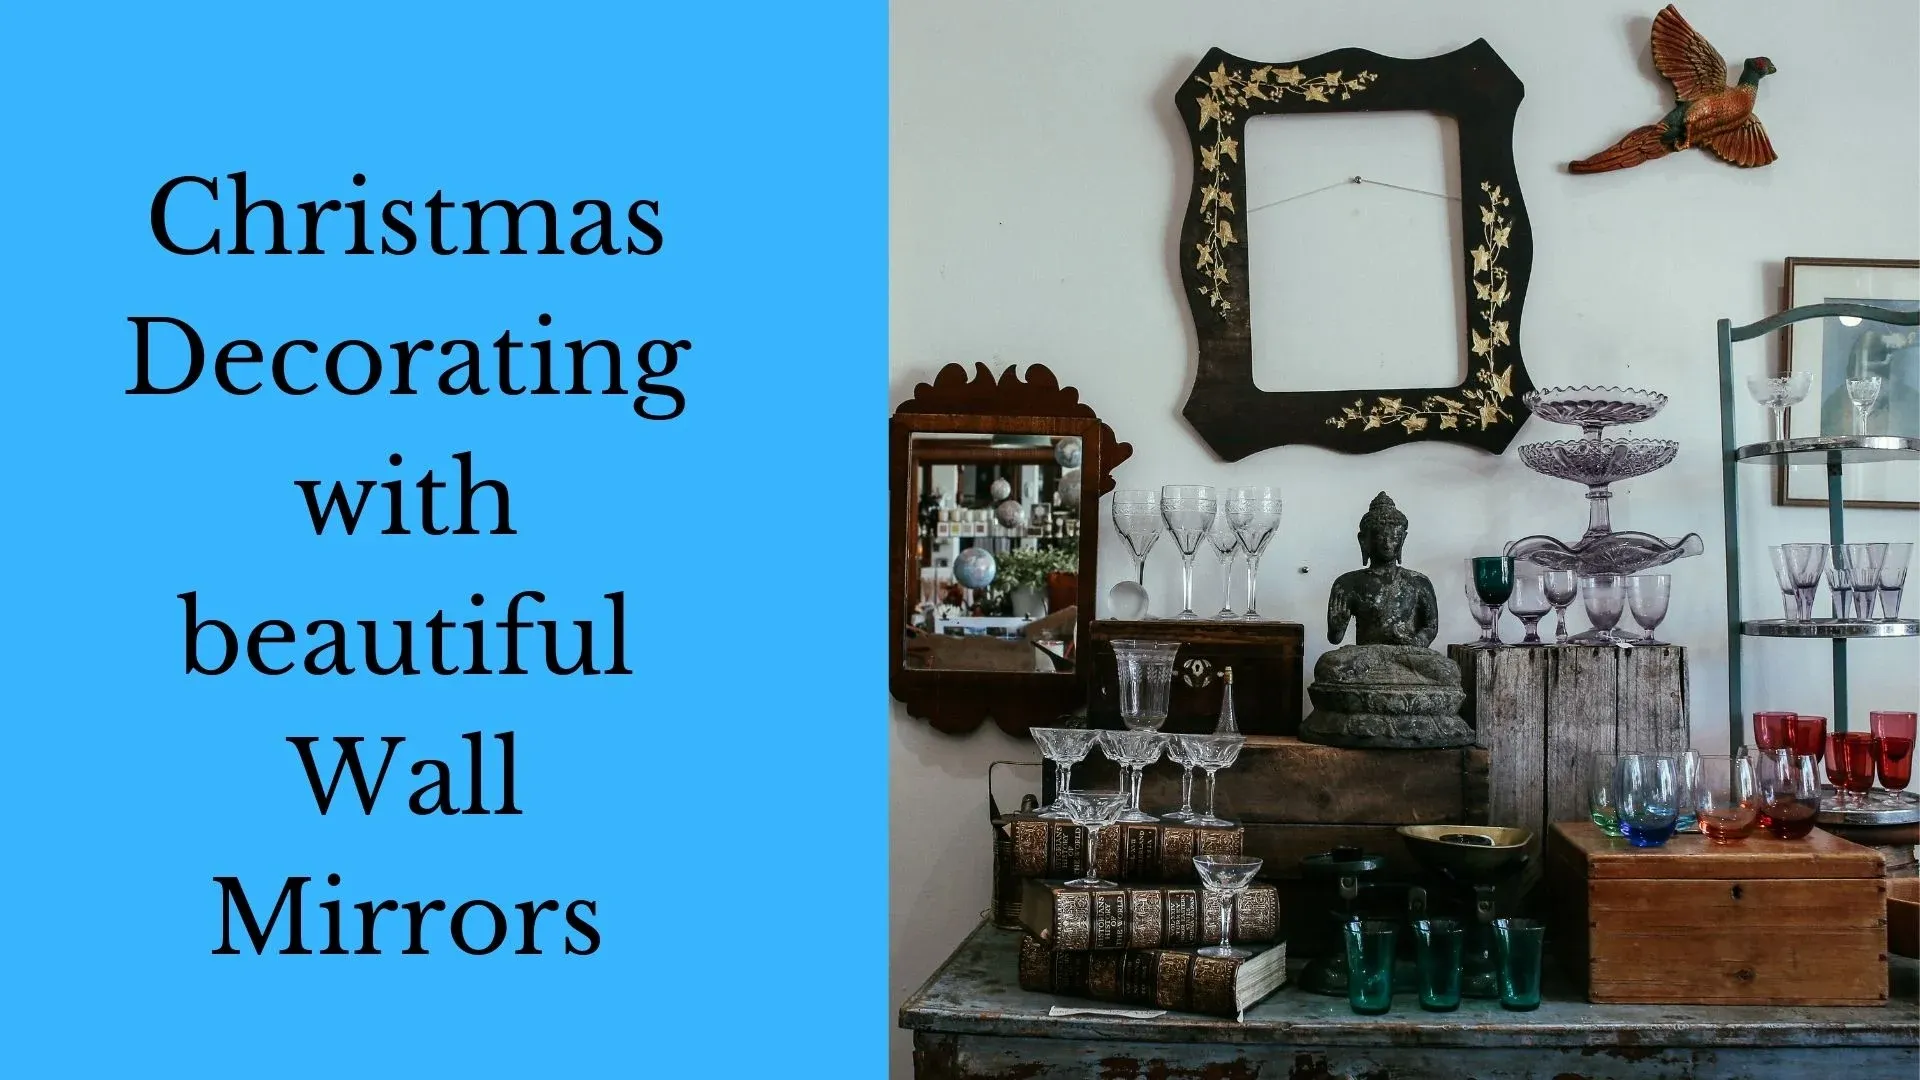 Christmas decorating with beautiful wall mirrors